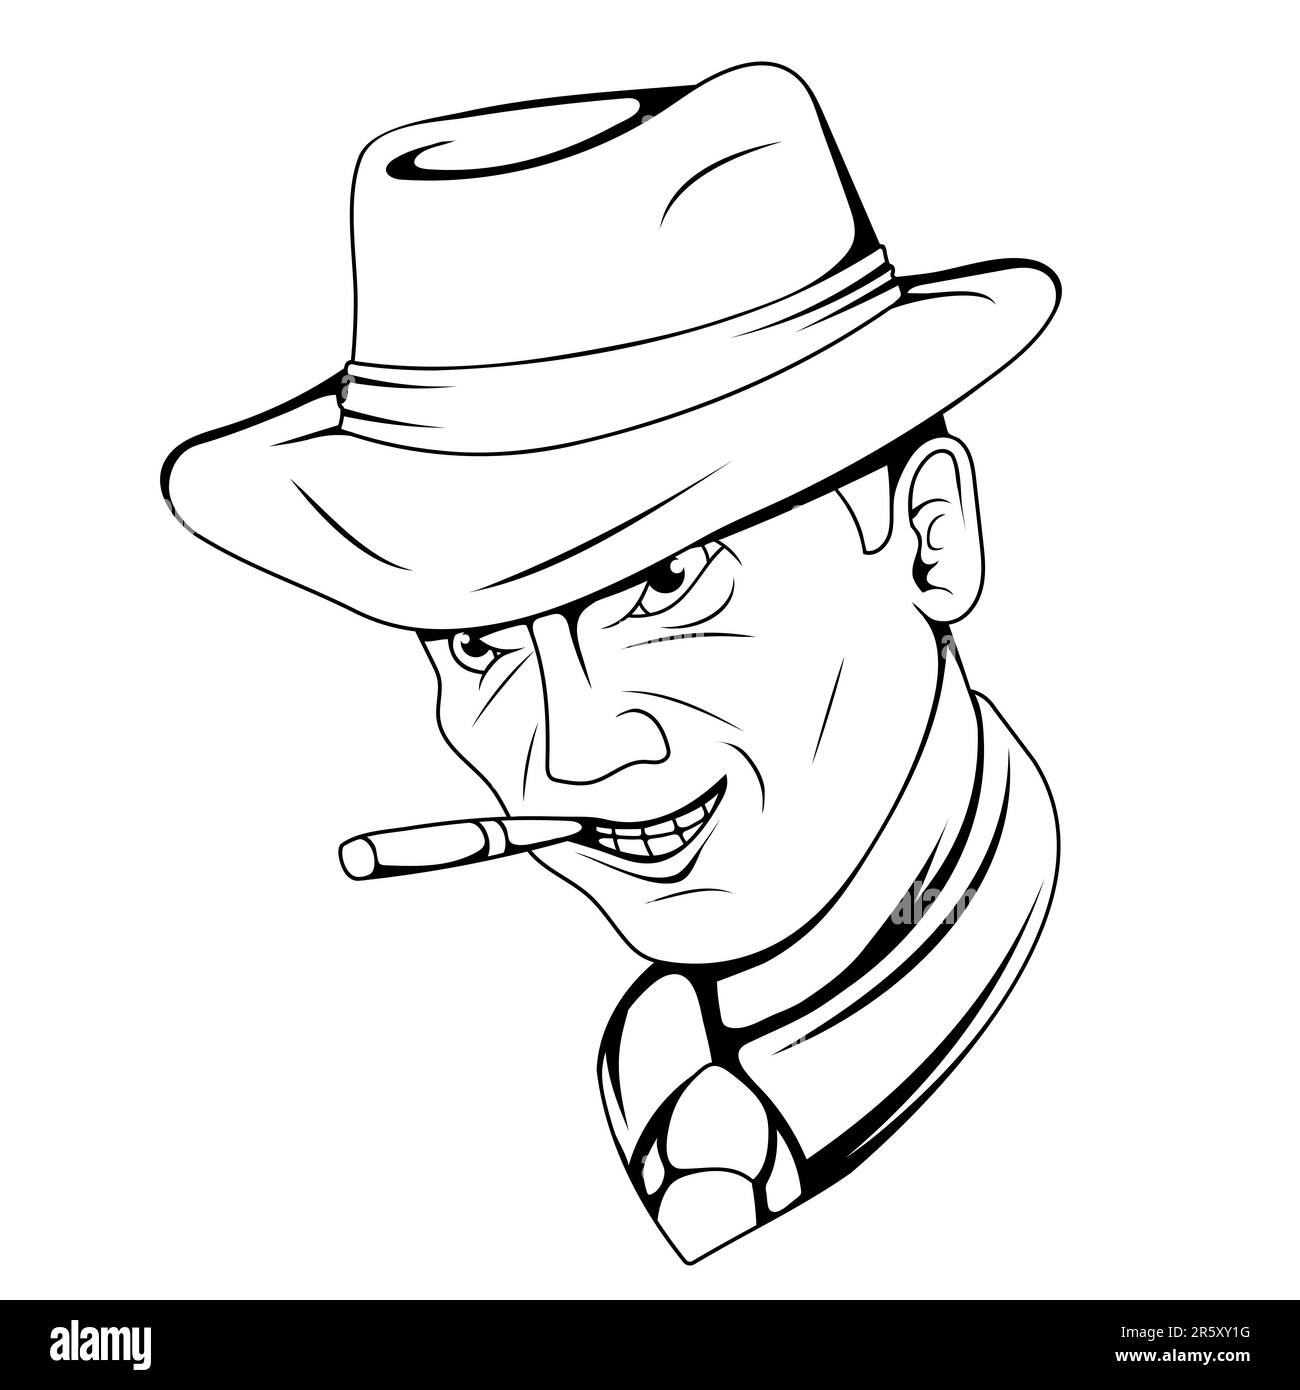 Gangster. Vector illustration of a sketch man with hat and cigar chicago gangster mafia. Brutal malware Stock Vector